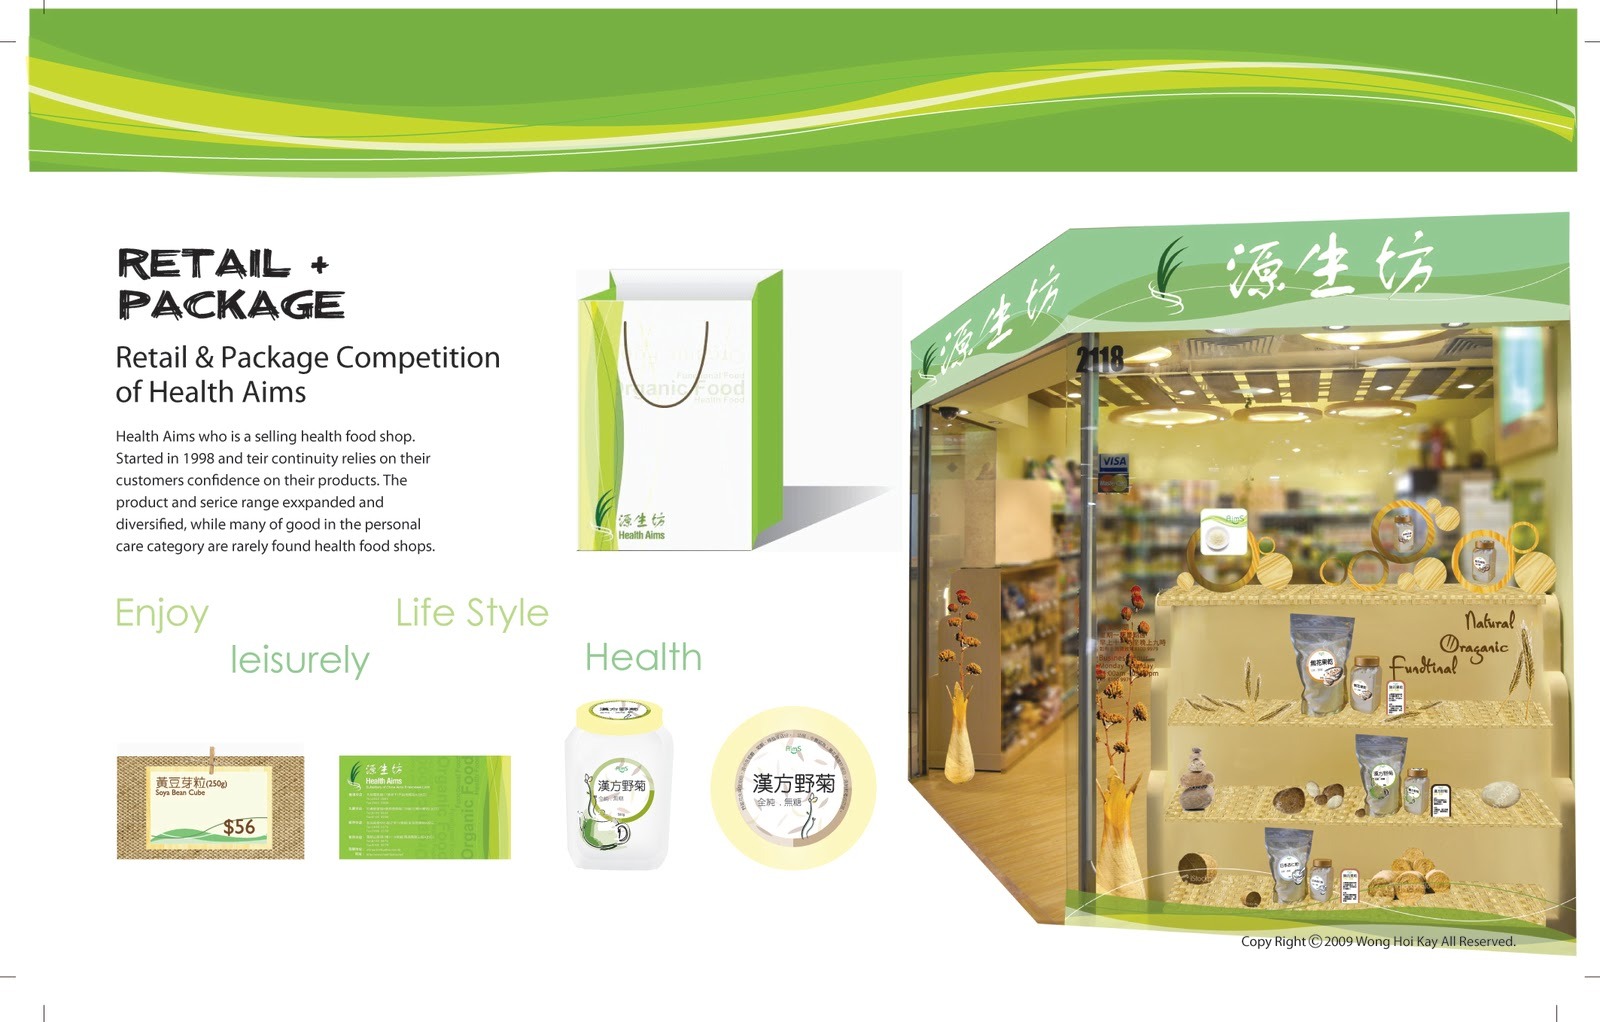 Retail x Package Health Aims Competition